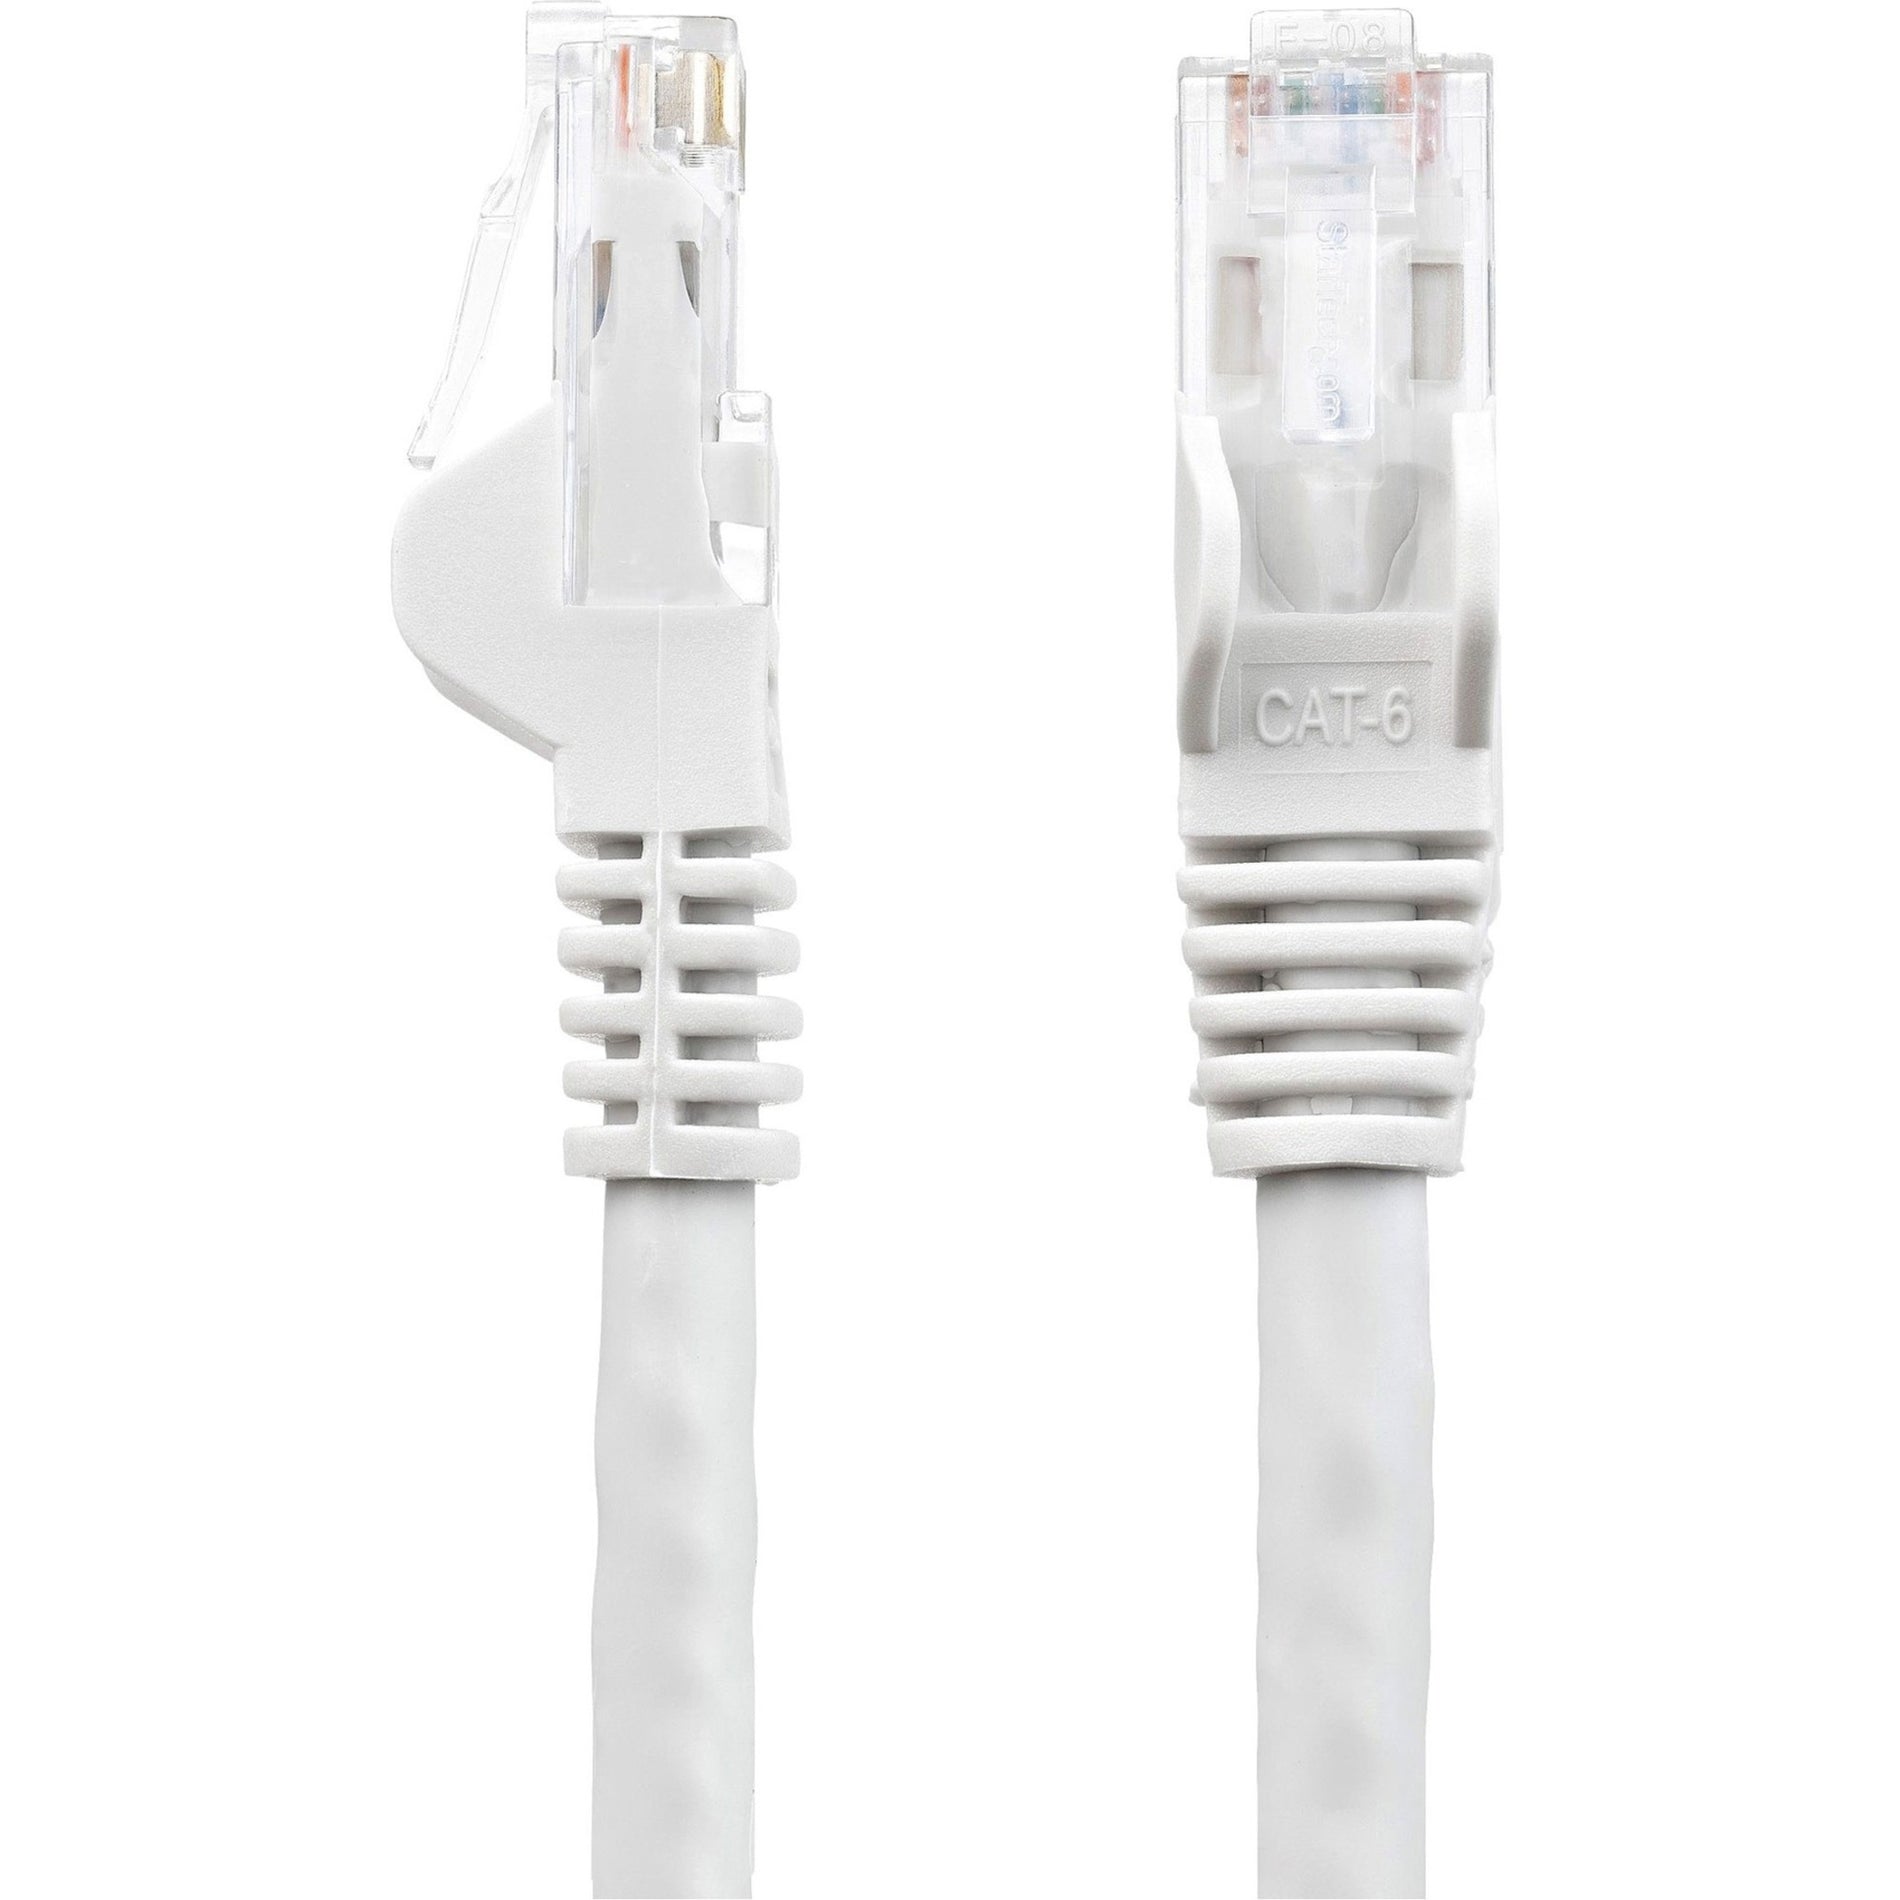 StarTech.com N6PATCH35WH 35 ft White Snagless Cat6 UTP Patch Cable, Lifetime Warranty, 10 Gbit/s Data Transfer Rate